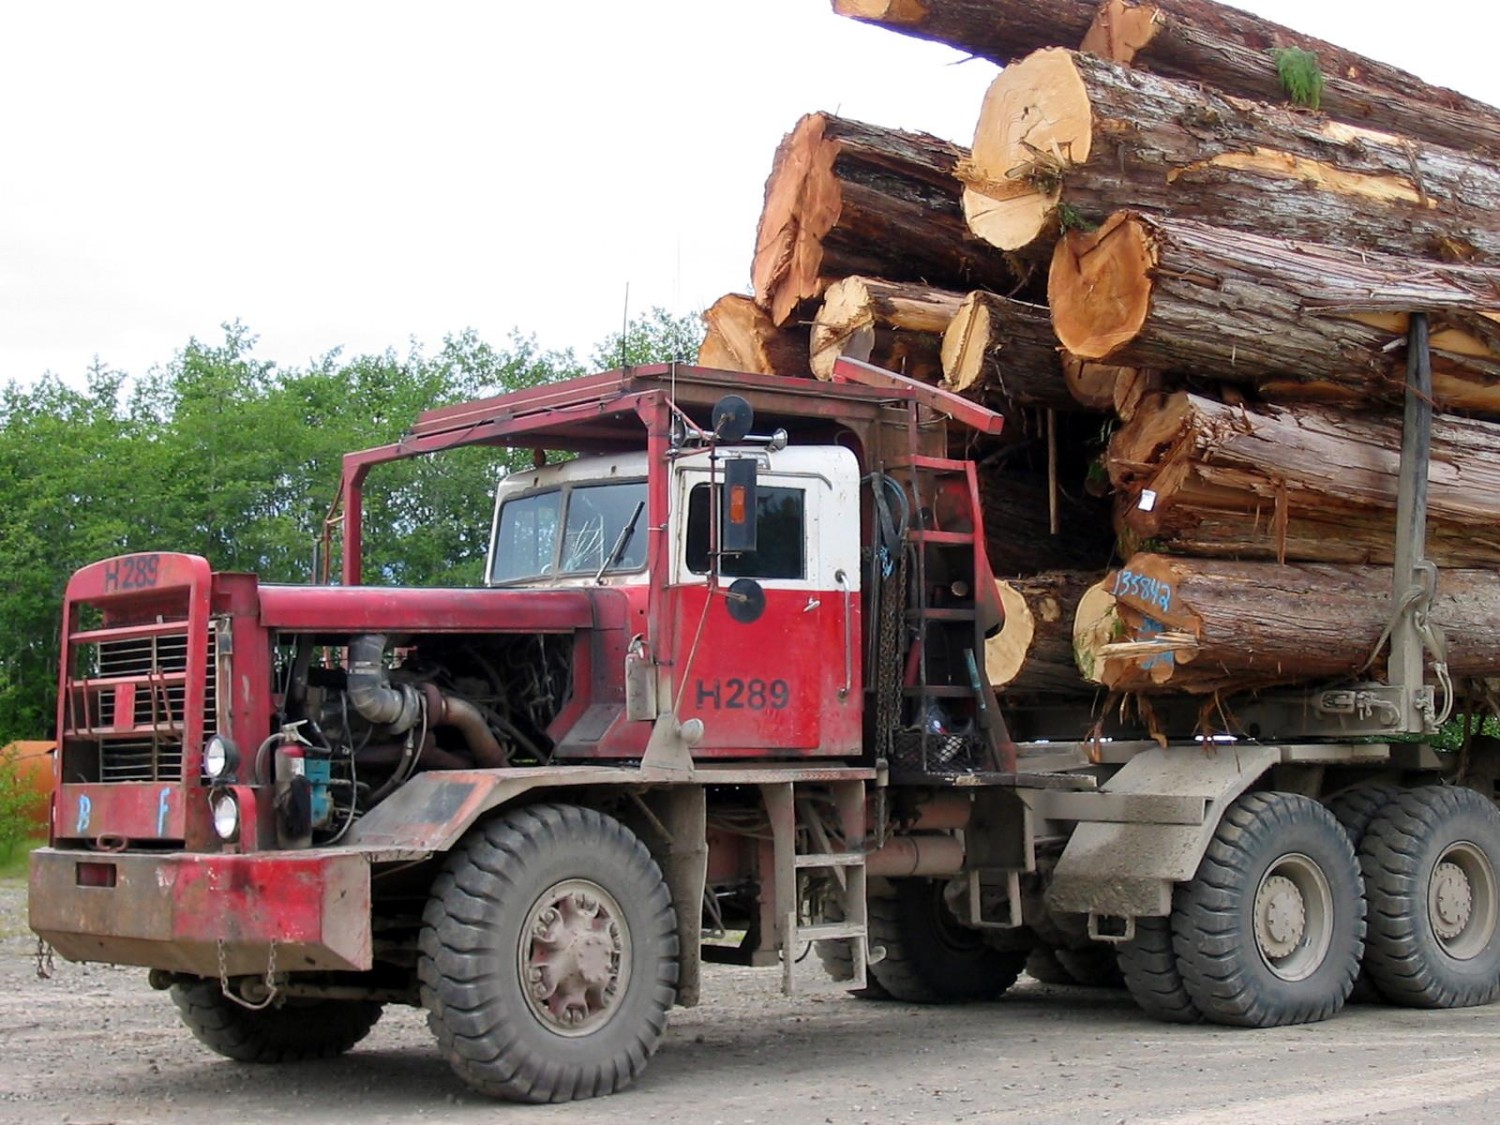 hayes-hdx-logging-truck-gm-v12-cw-13-speed-91000-lb-planetary-read-ends-and-12-foot-logging-bunks-and-trailer-big-16